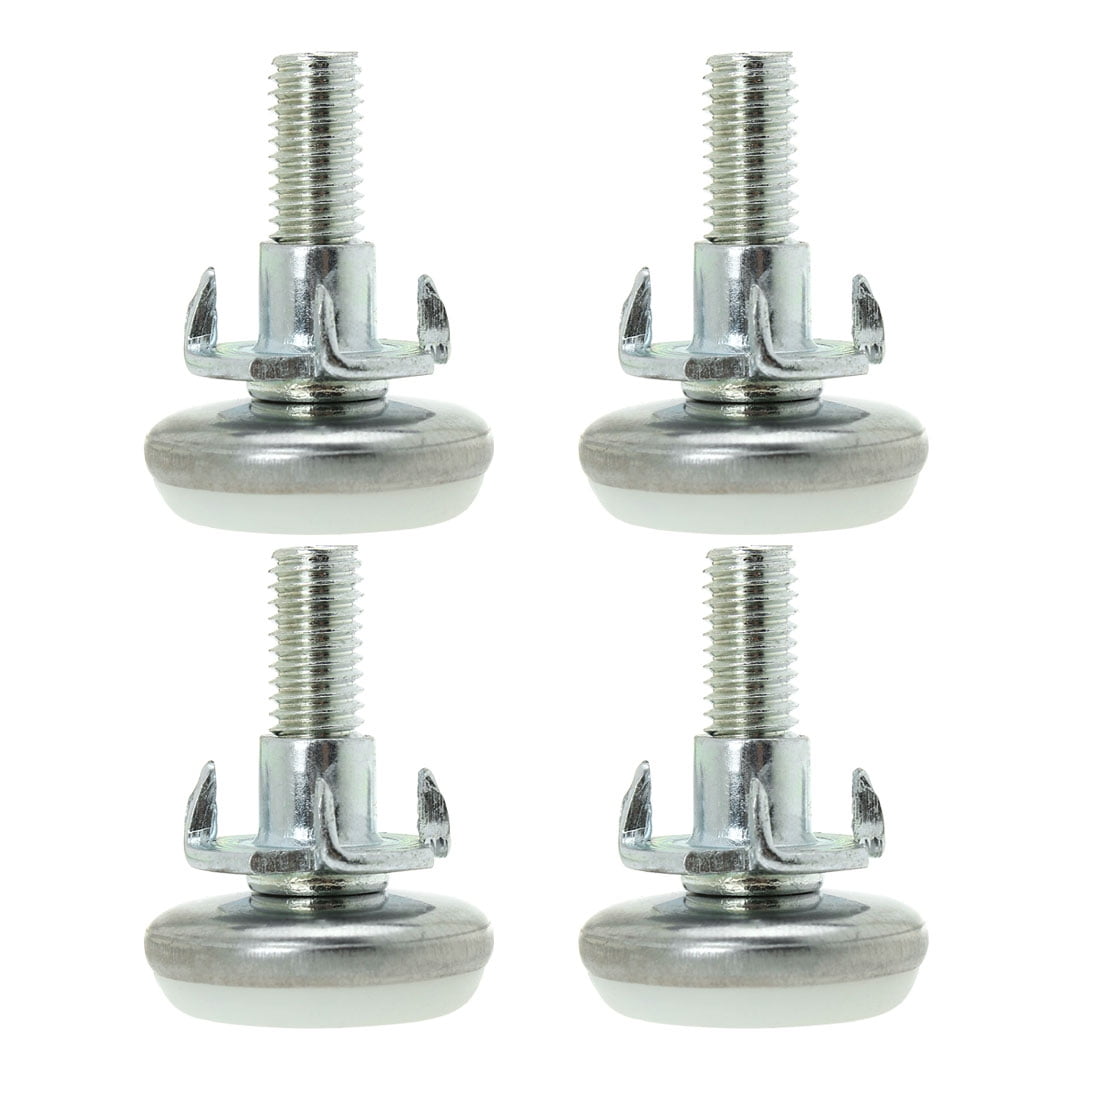 Details about   M6 x 25 x 28mm Leveling Feet Adjustable Leveler with T-nuts for Chair Desk Leg 